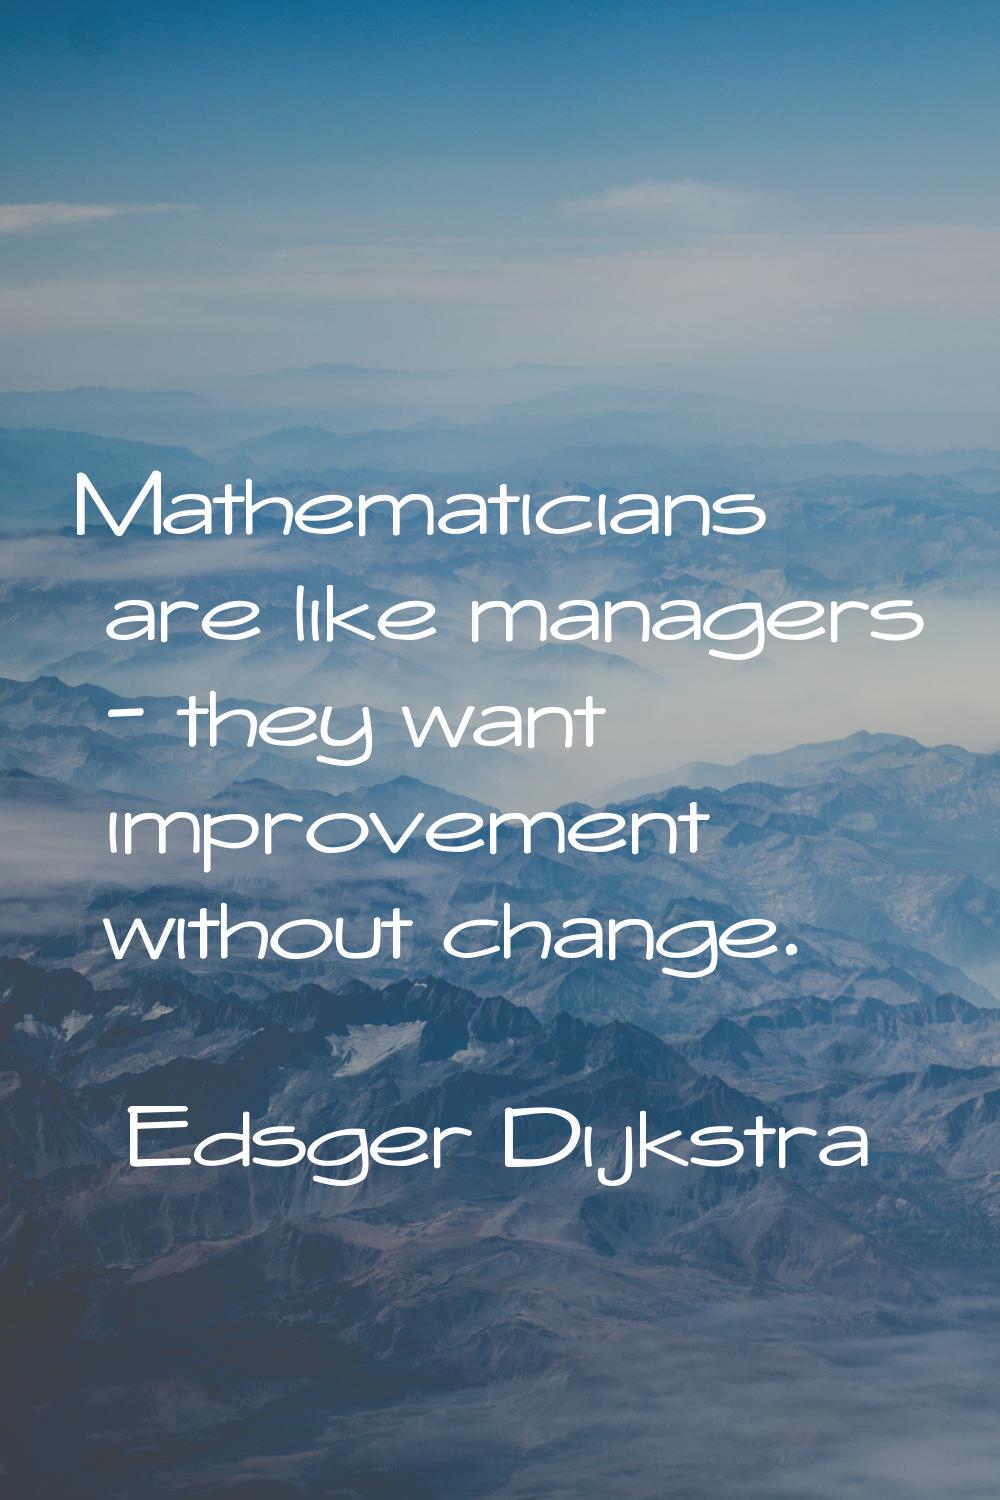 Mathematicians are like managers - they want improvement without change.